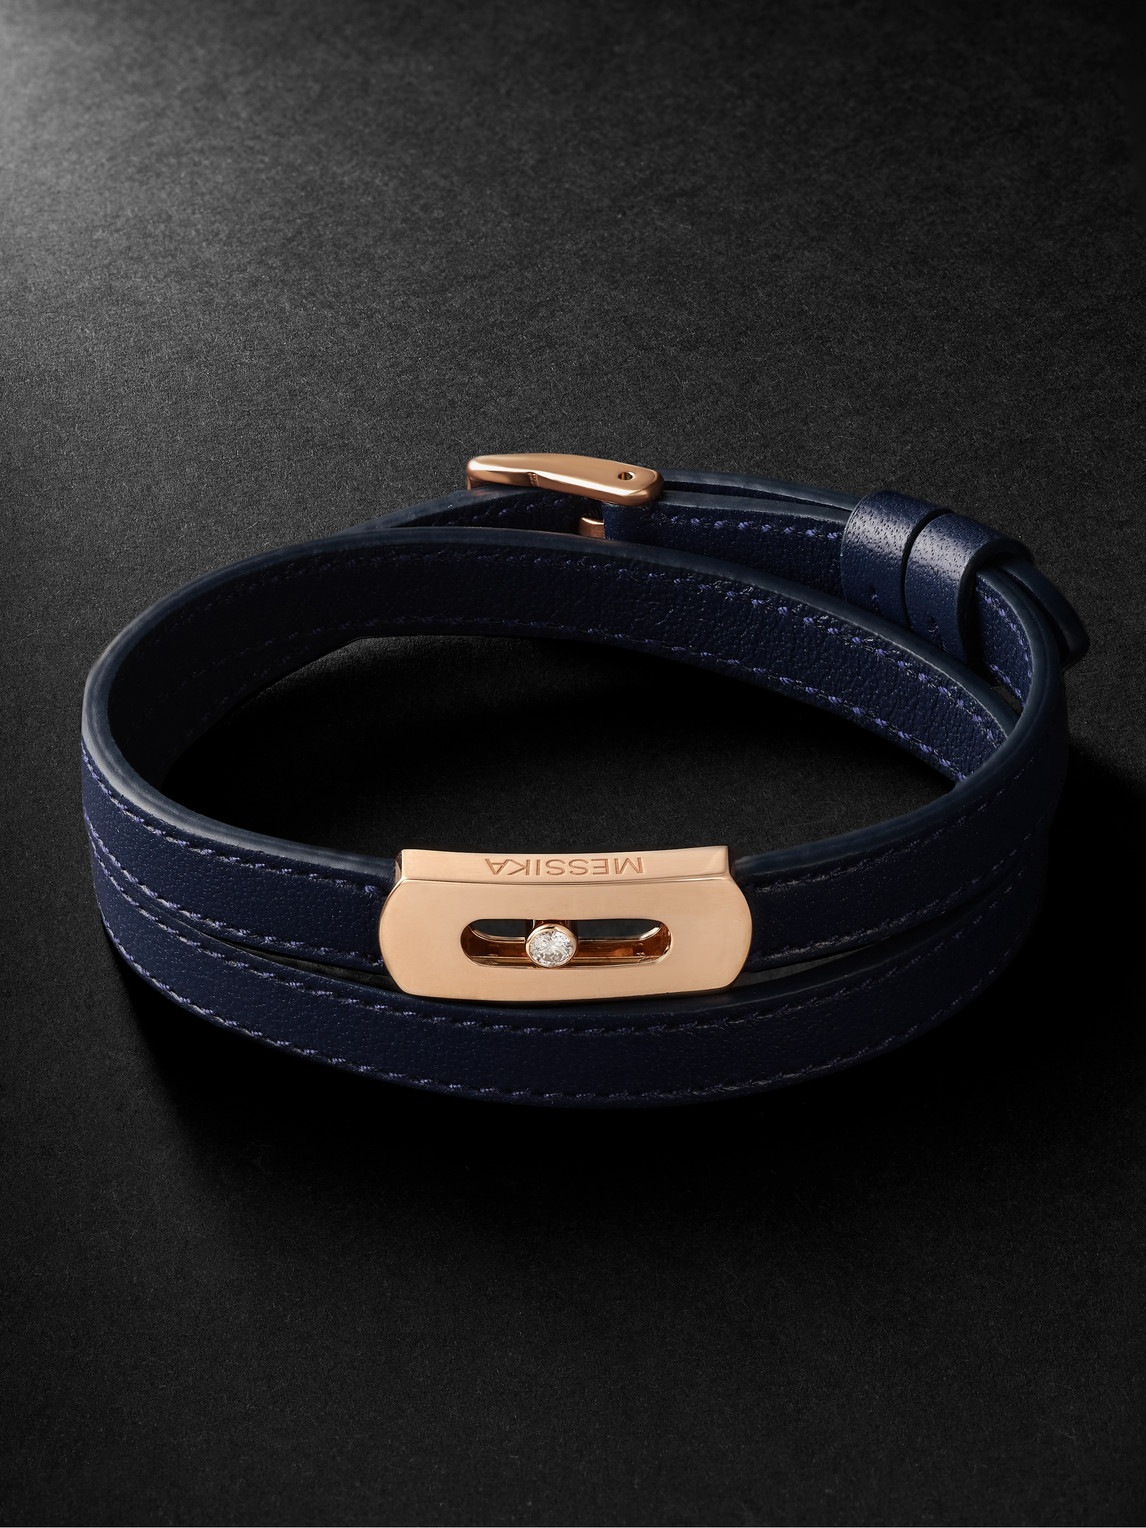 Messika - My Move Rose Gold, Diamond and Leather Bracelet - Men - Blue - L von Messika